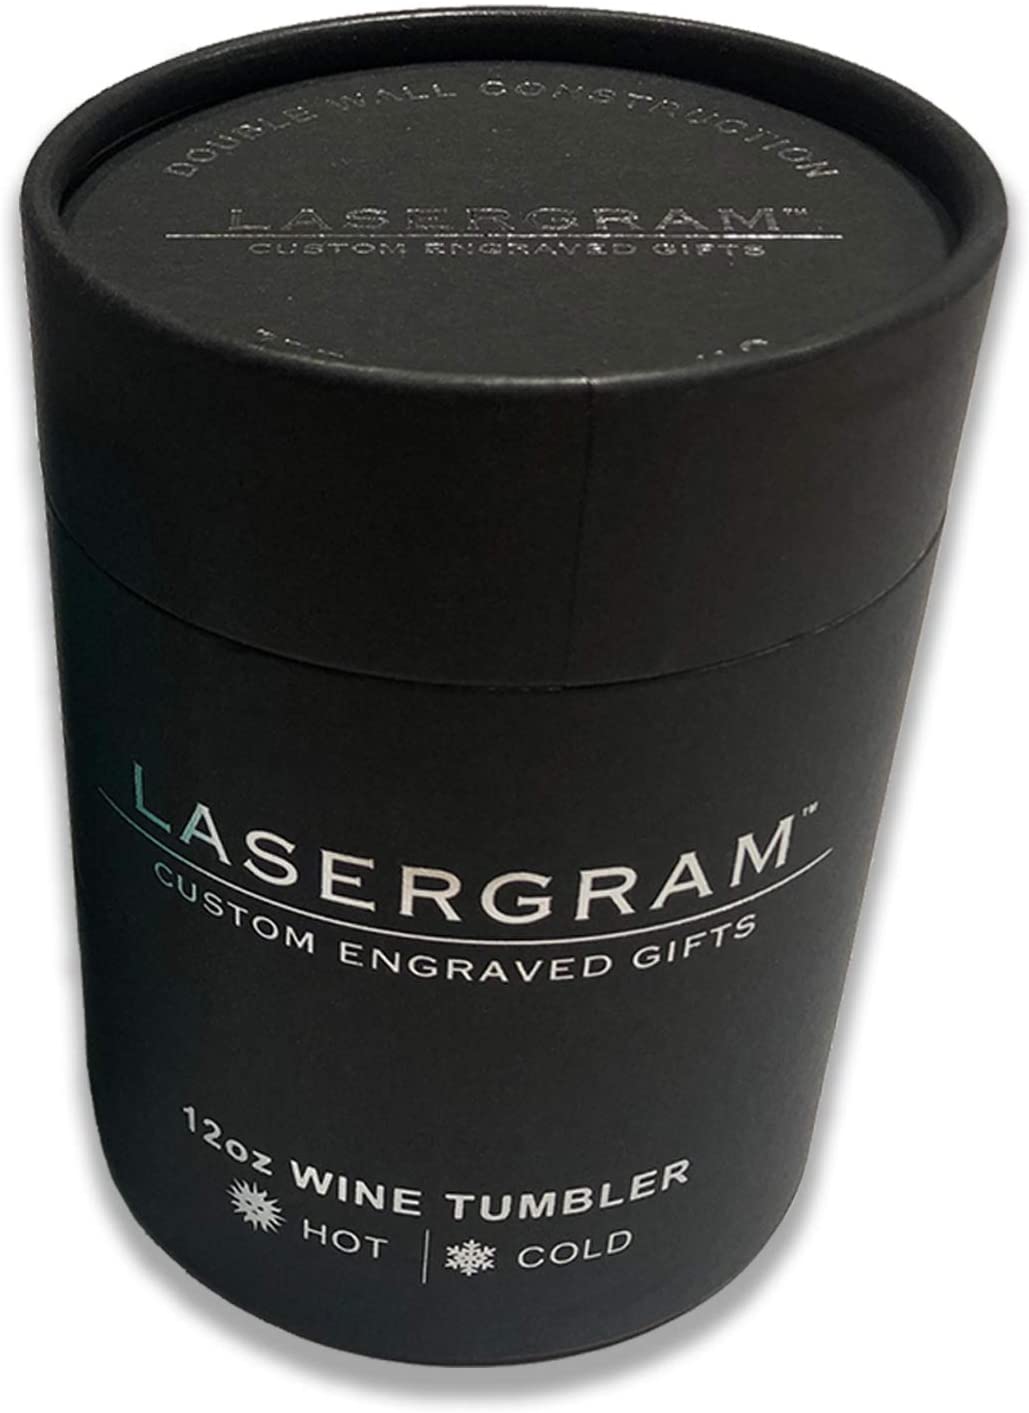 LaserGram Double Wall Stainless Steel Wine Glass, Real Estate, Personalized Engraving Included